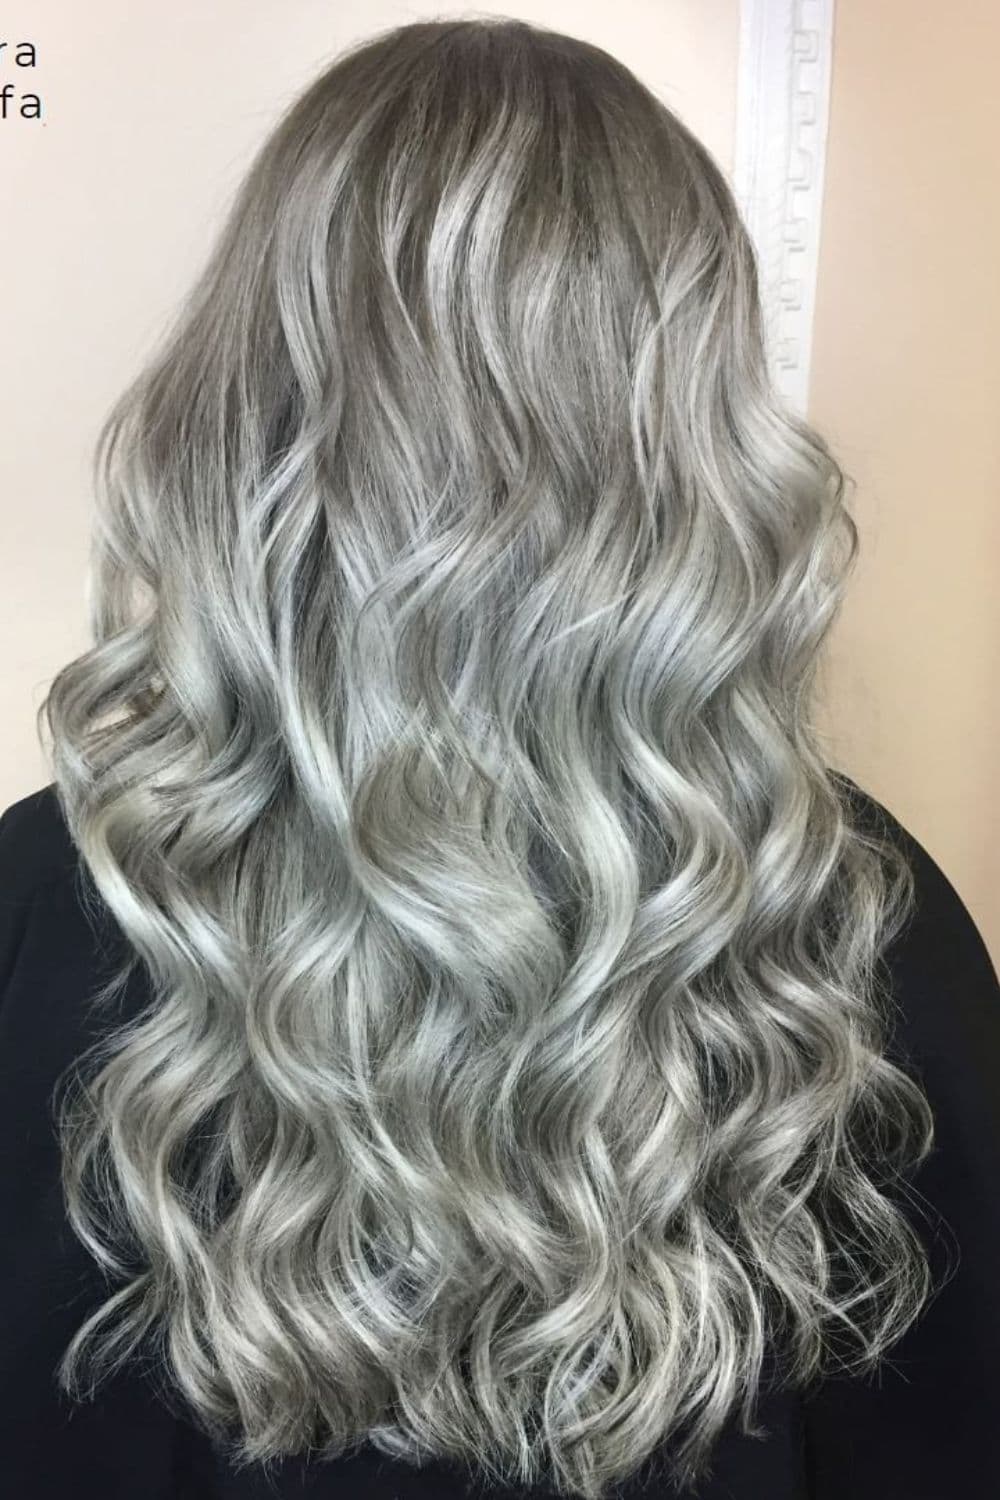 A woman with long silver dirty blonde hair with curls.